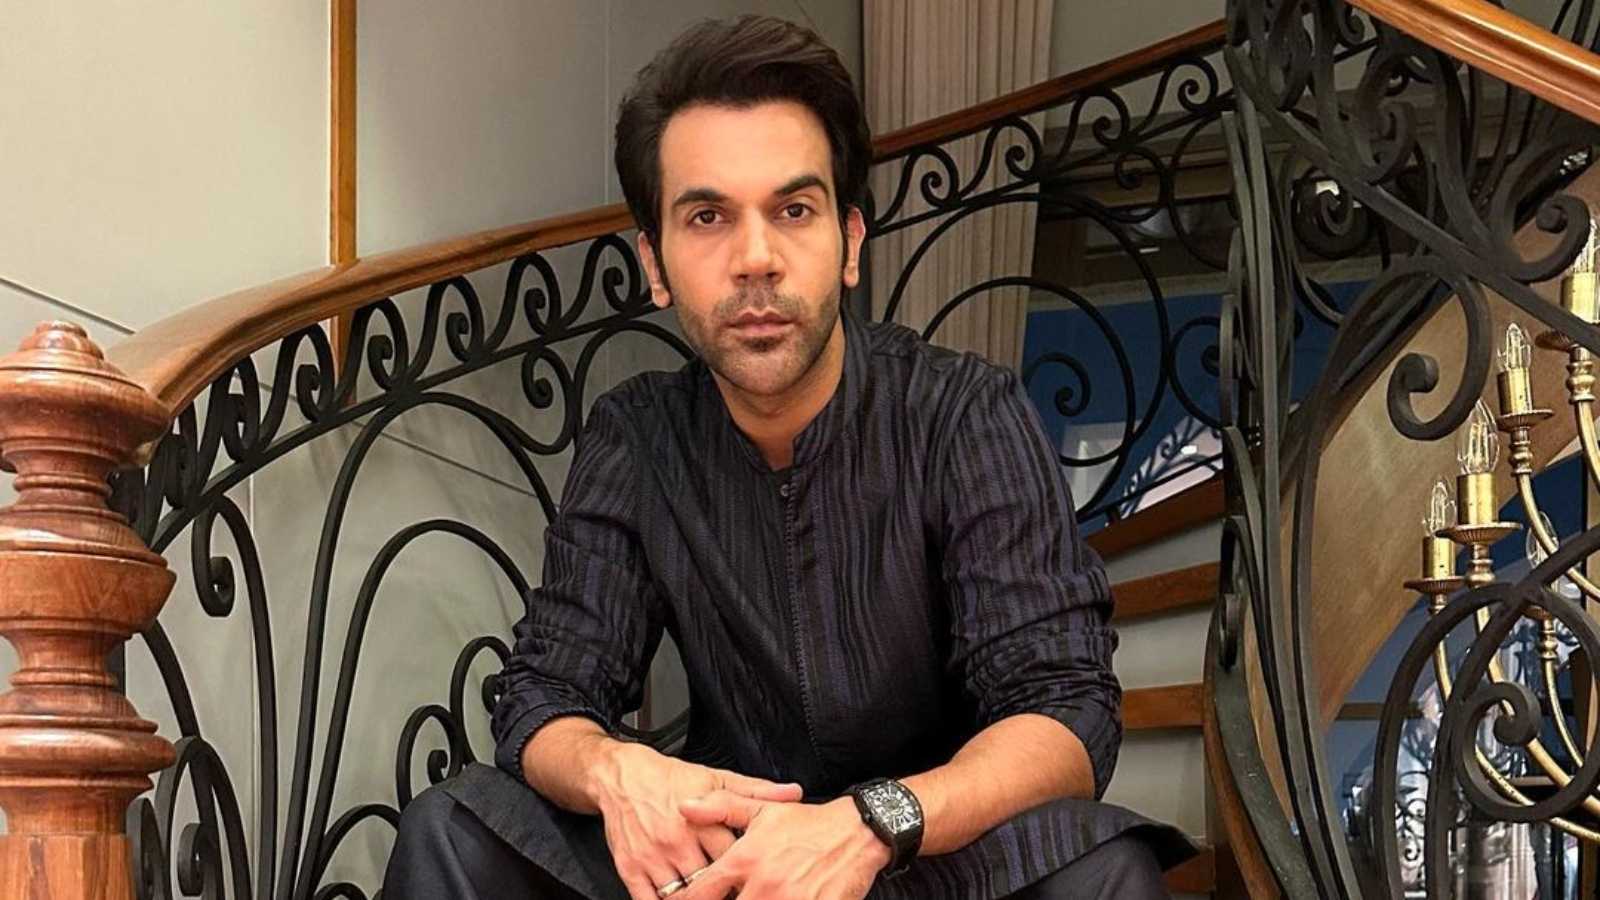 Rajkummar Rao takes his film Shahid as a learning says, 'We don’t really need a lot of money to make a good film'